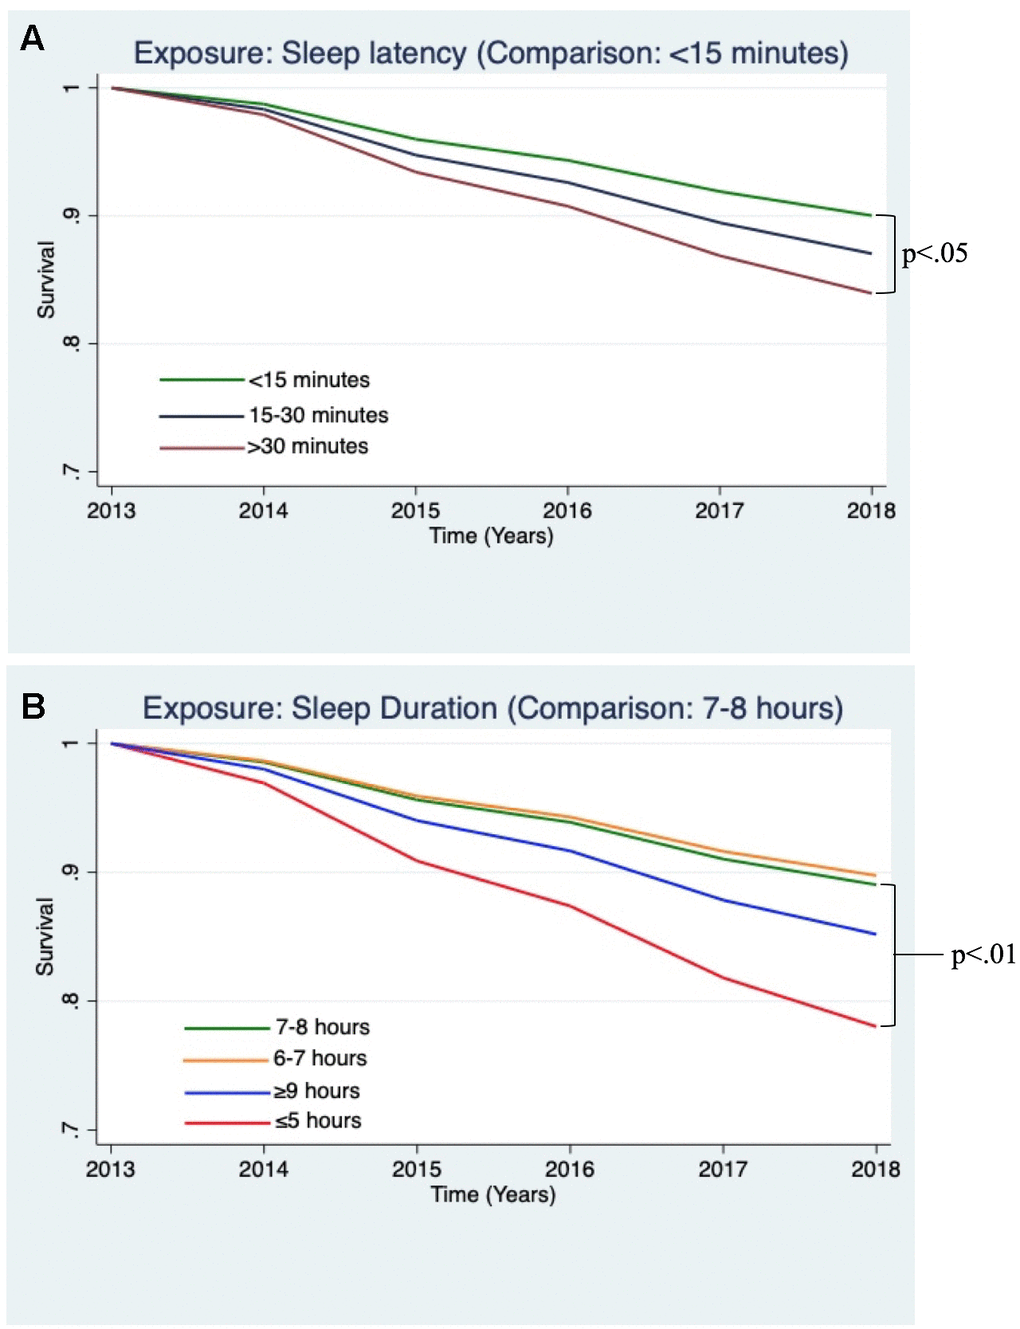 Estimated survival curves displaying the relationships between sleep variables and incident dementia, adjusting for covariates, which were found to be significant in the Cox hazard proportional models. (A) Survival curve from the Cox model examining incident dementia and sleep latency, adjusting for covariates. Sleep latency >30 minutes, as compared to B) Survival curve from Cox model examining incident dementia and sleep duration, adjusting for covariates. Sleep duration ≤5 hours, compared to 7-8 hours, was associated a greater risk of incident dementia (p